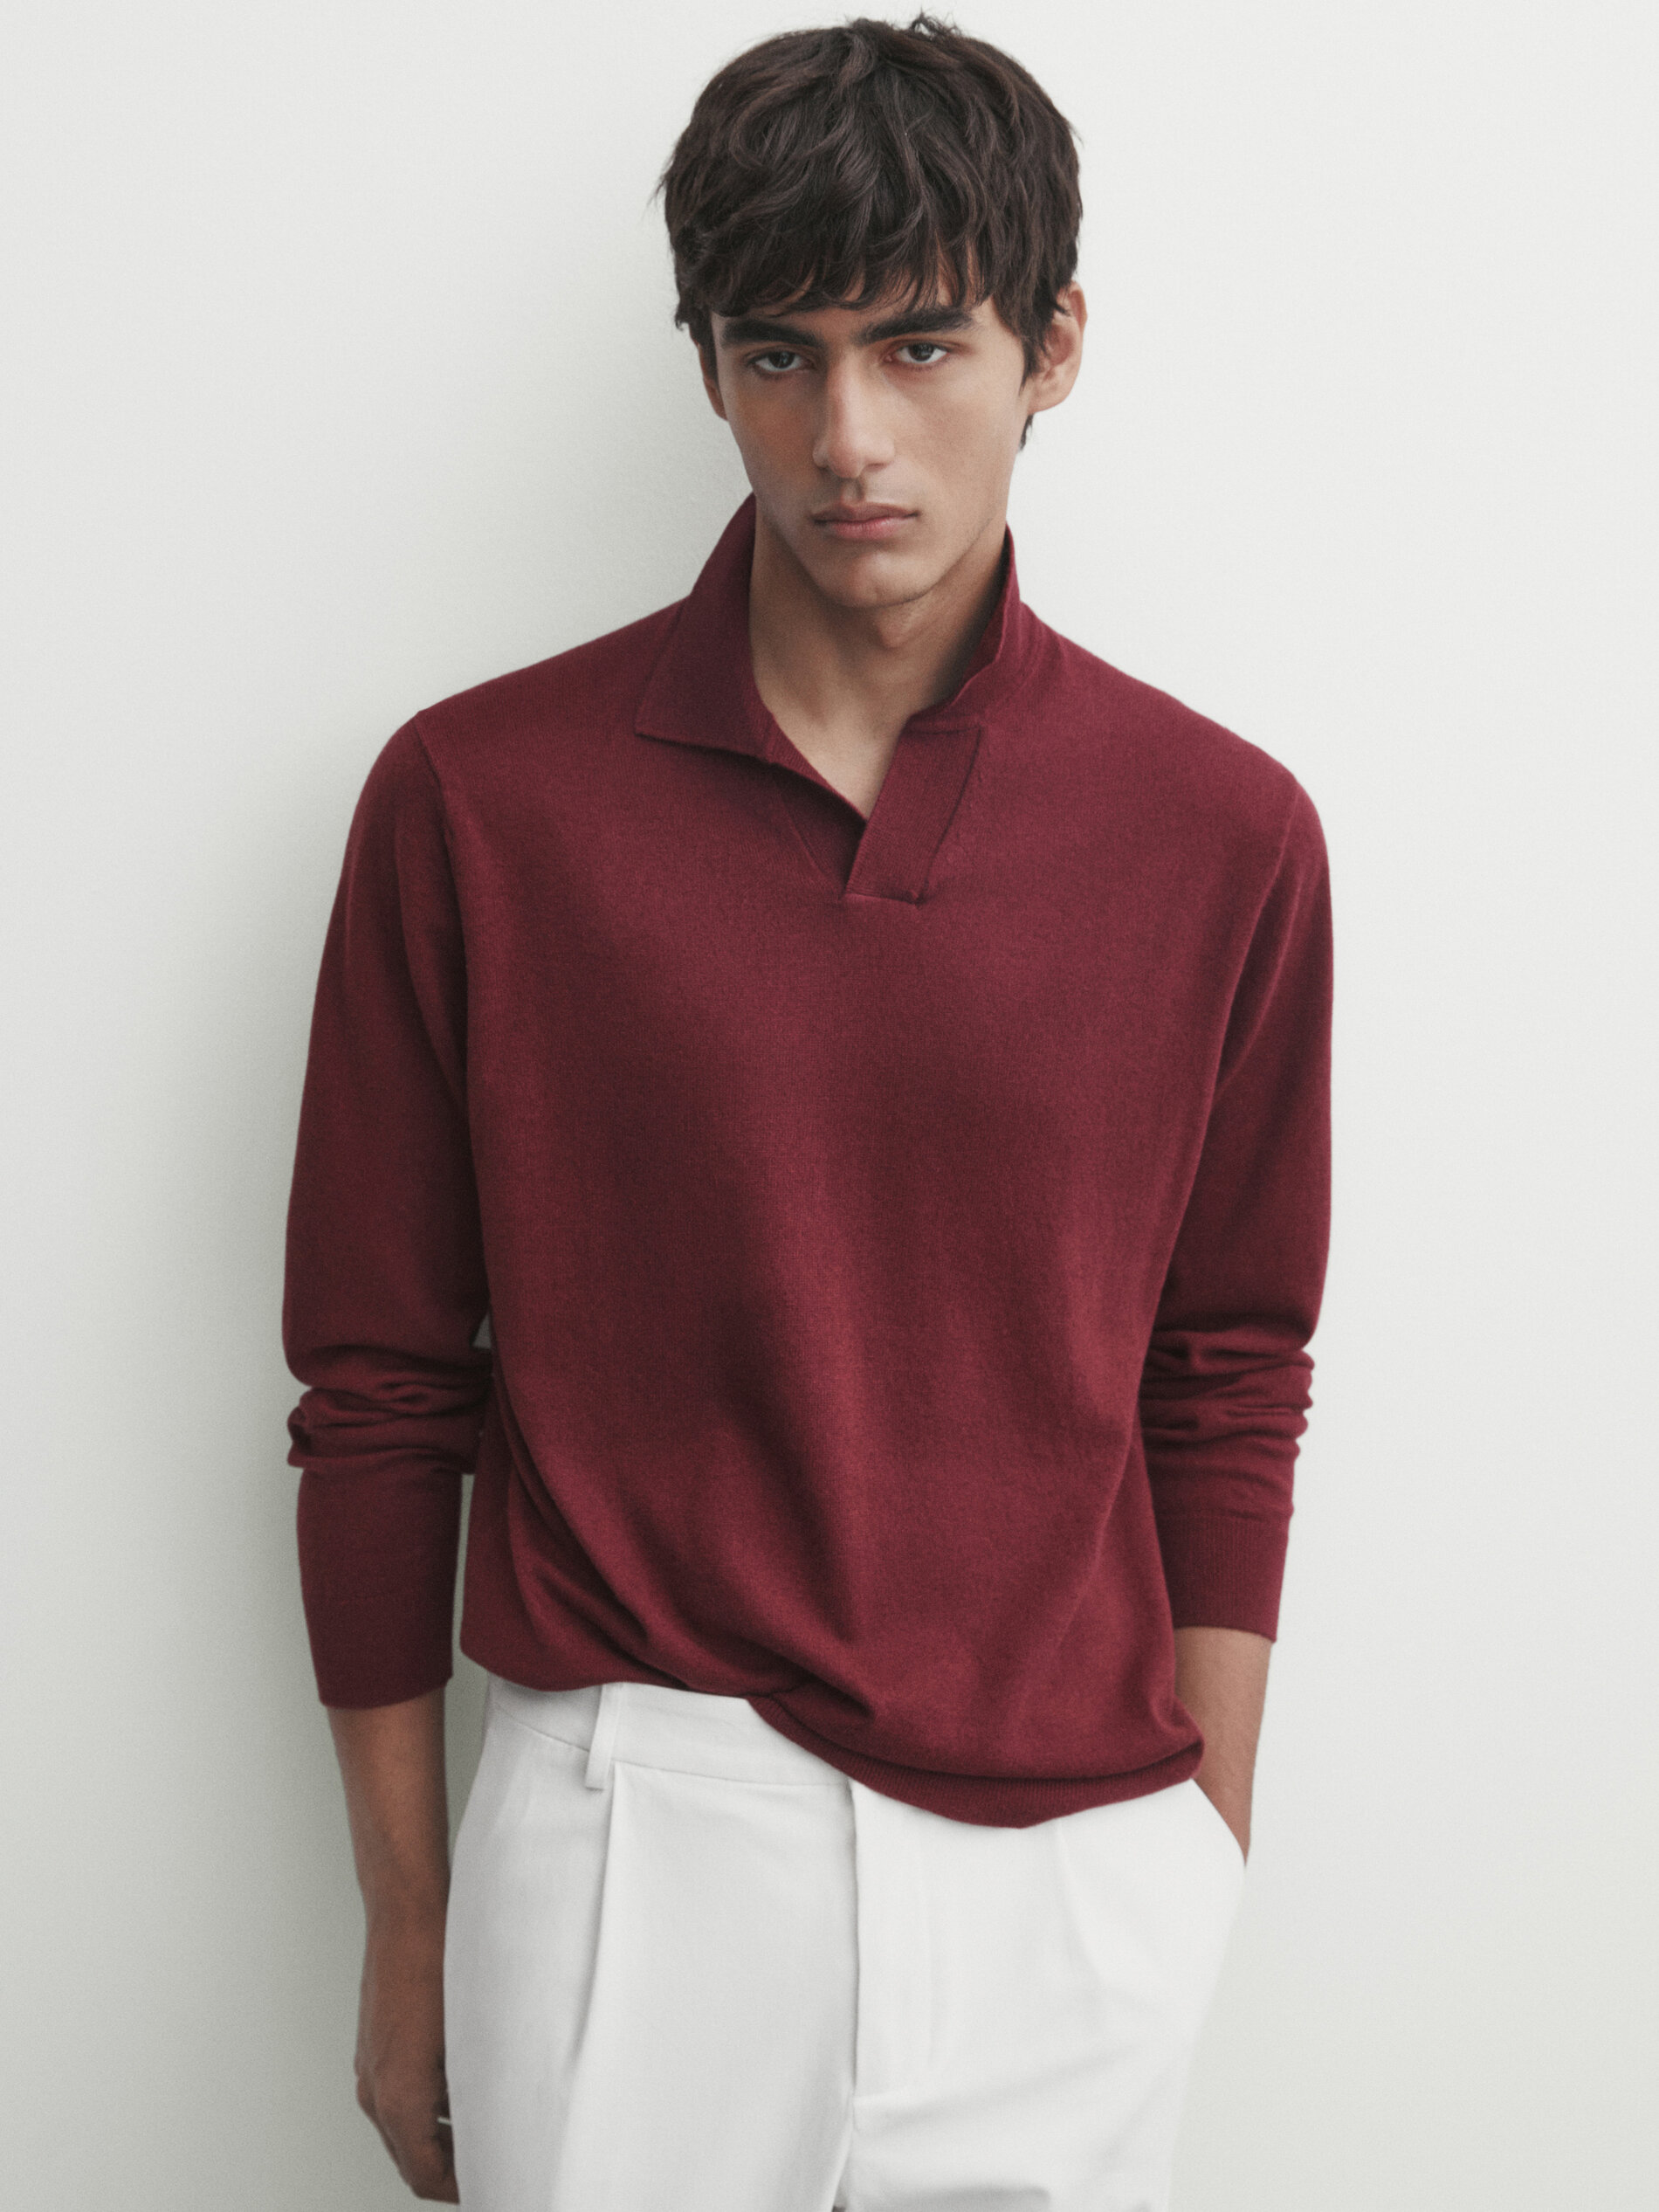 Wool and cotton blend knit polo sweater